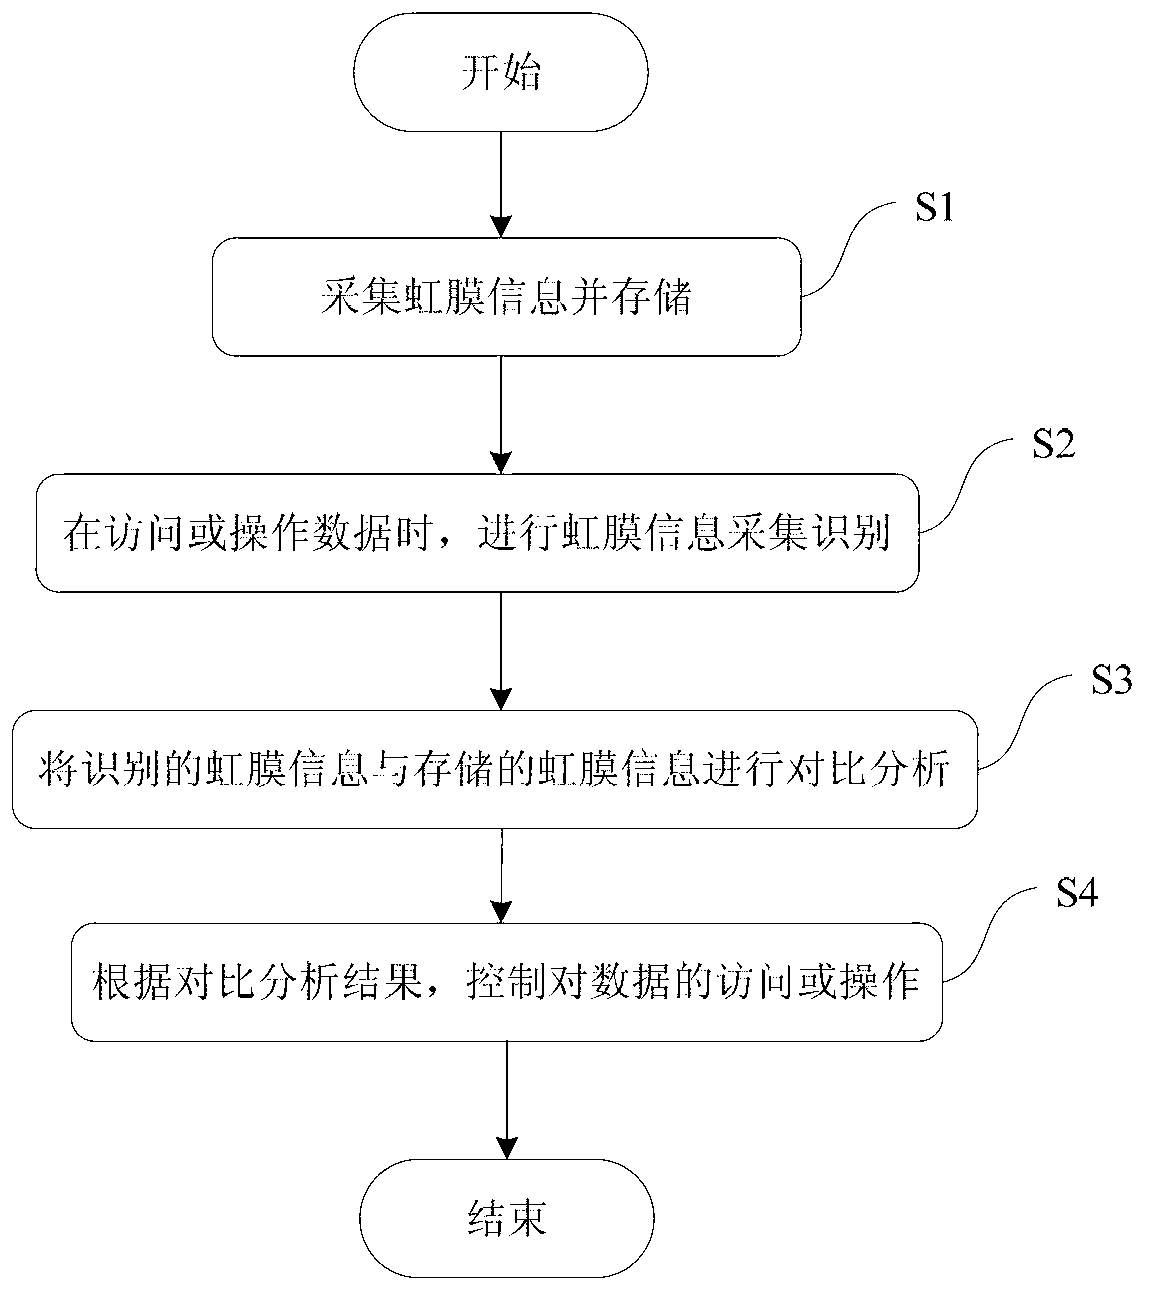 Method and system for protecting data based on iris identification